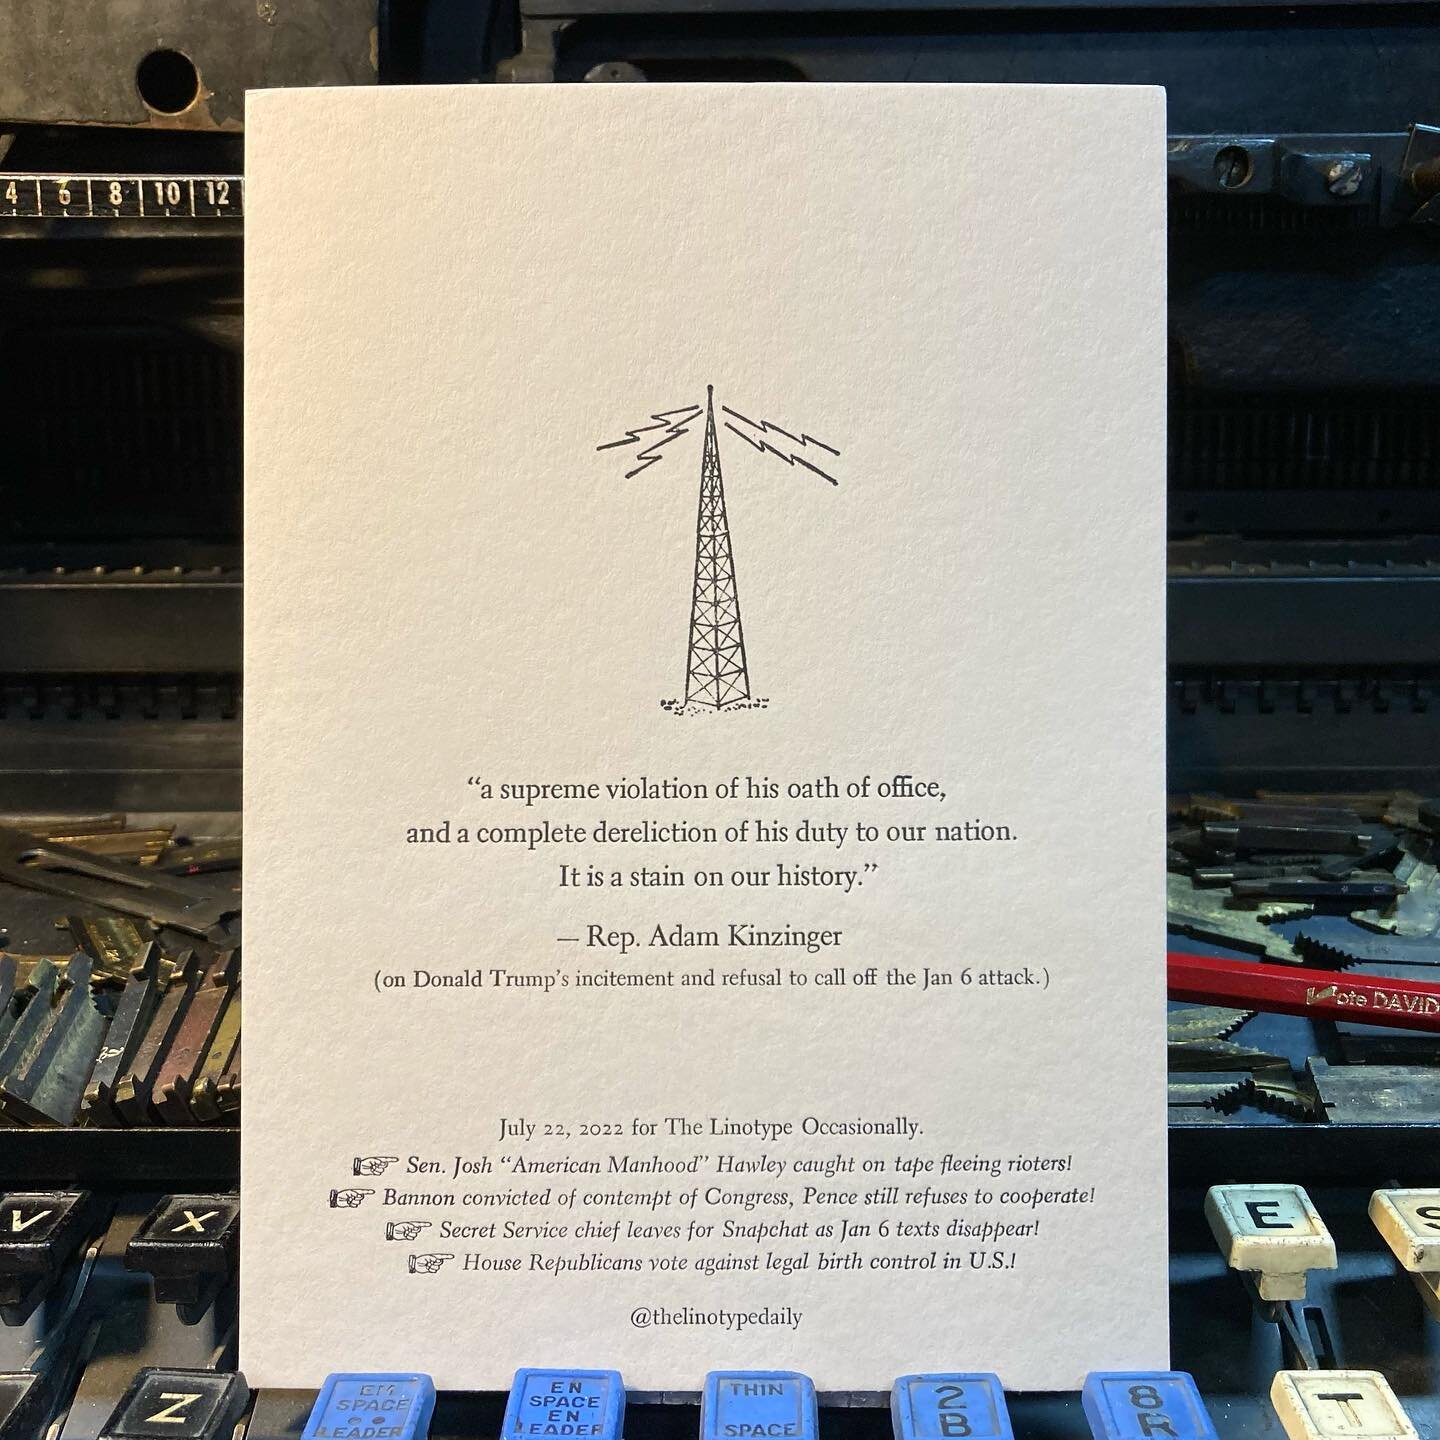 &ldquo;If there is no accountability for Jan 6 - for every part of this scheme - I fear that we will not overcome the ongoing threat to our democracy.&rdquo;
- Jan 6 Committee Co-chair Bennie Thompson #linotype #letterpress #radiotower #derelictionof